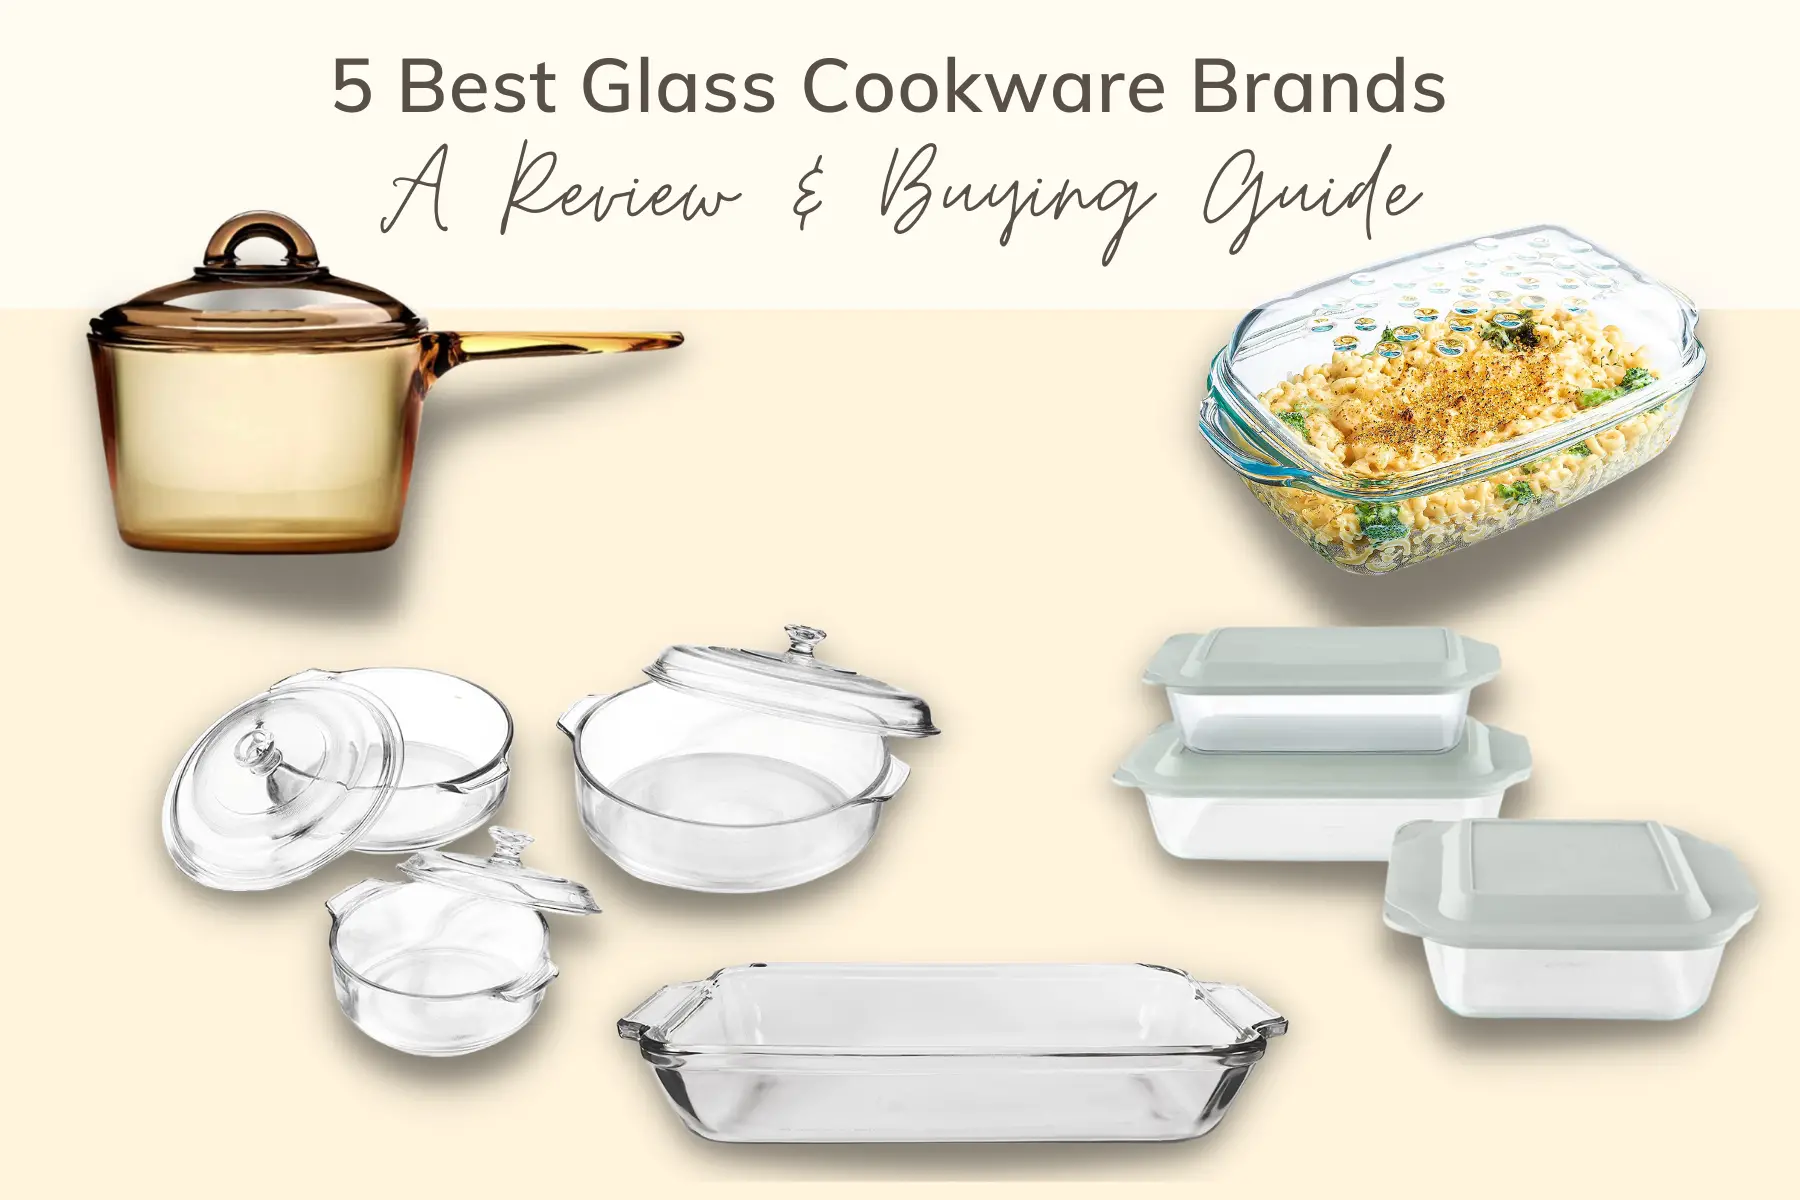 5 Best Glass Cookware Brands: A Review & Buying Guide